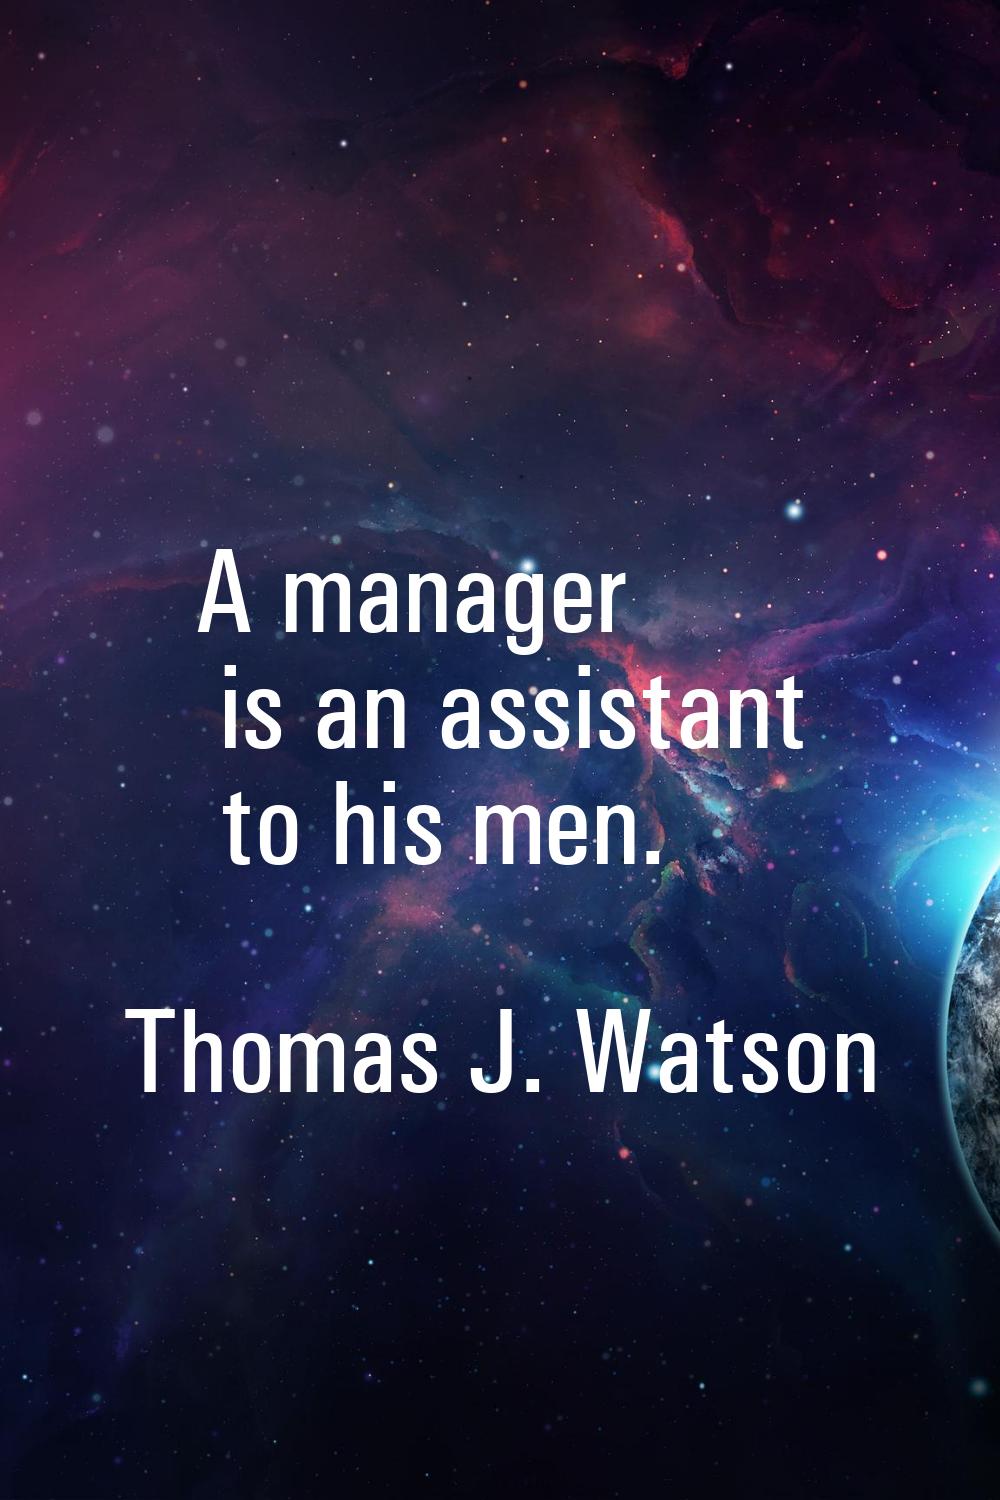 A manager is an assistant to his men.